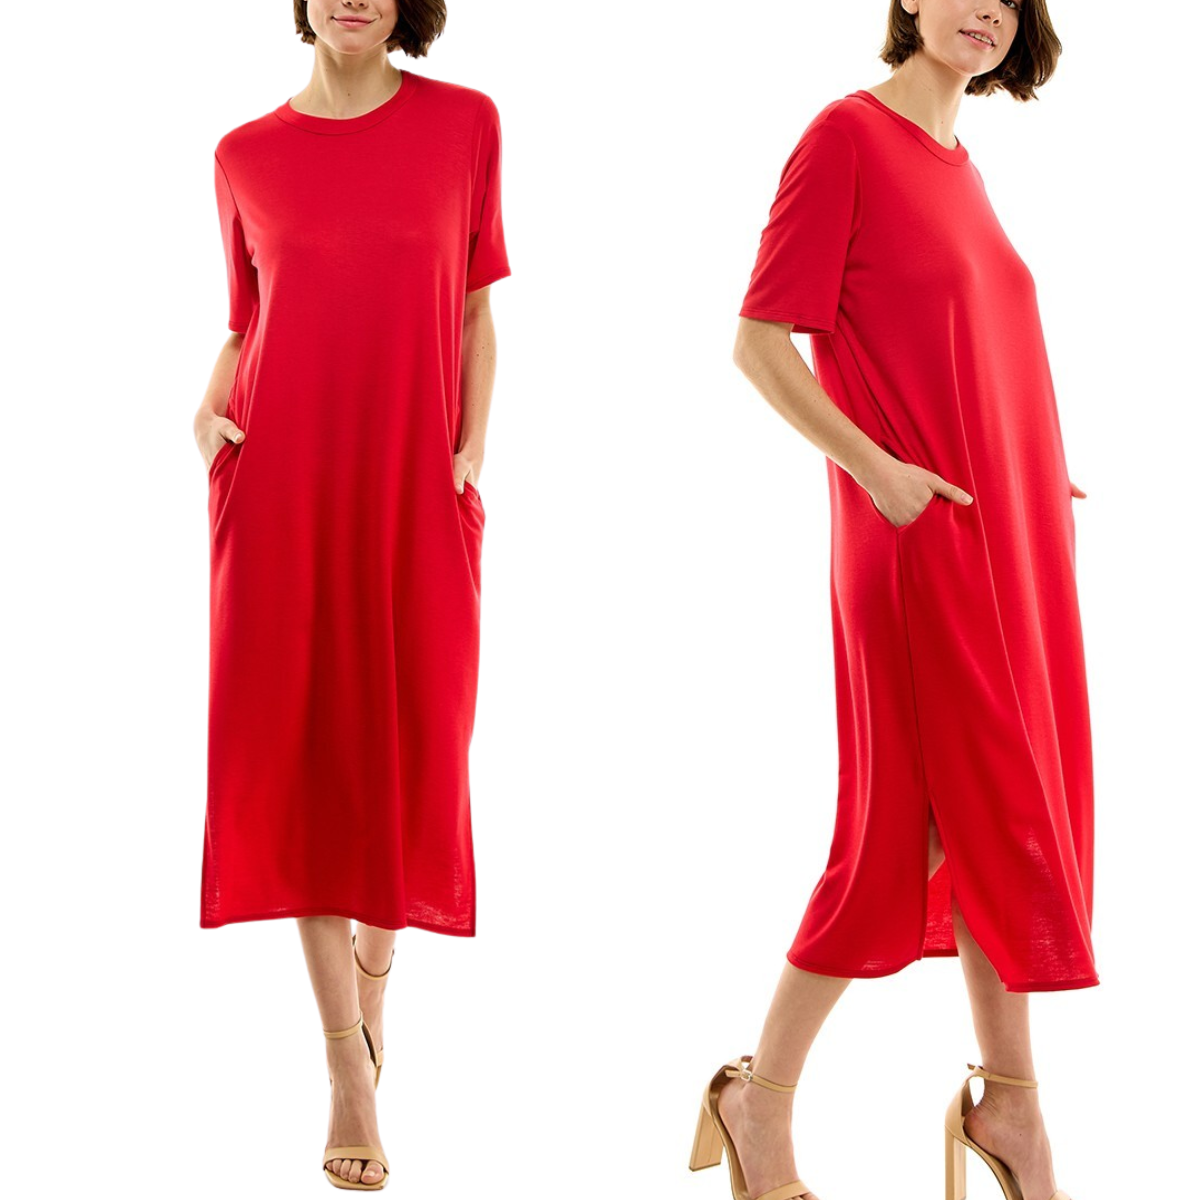 Two images of a person wearing a flowy and comfortable, loose-fitting, red French Terry Short Sleeve Midi Dress with Side Slits by FASHION GO. The dress features short sleeves and pockets. The person is posing with hands in the pockets, complementing the outfit with beige heeled sandals.